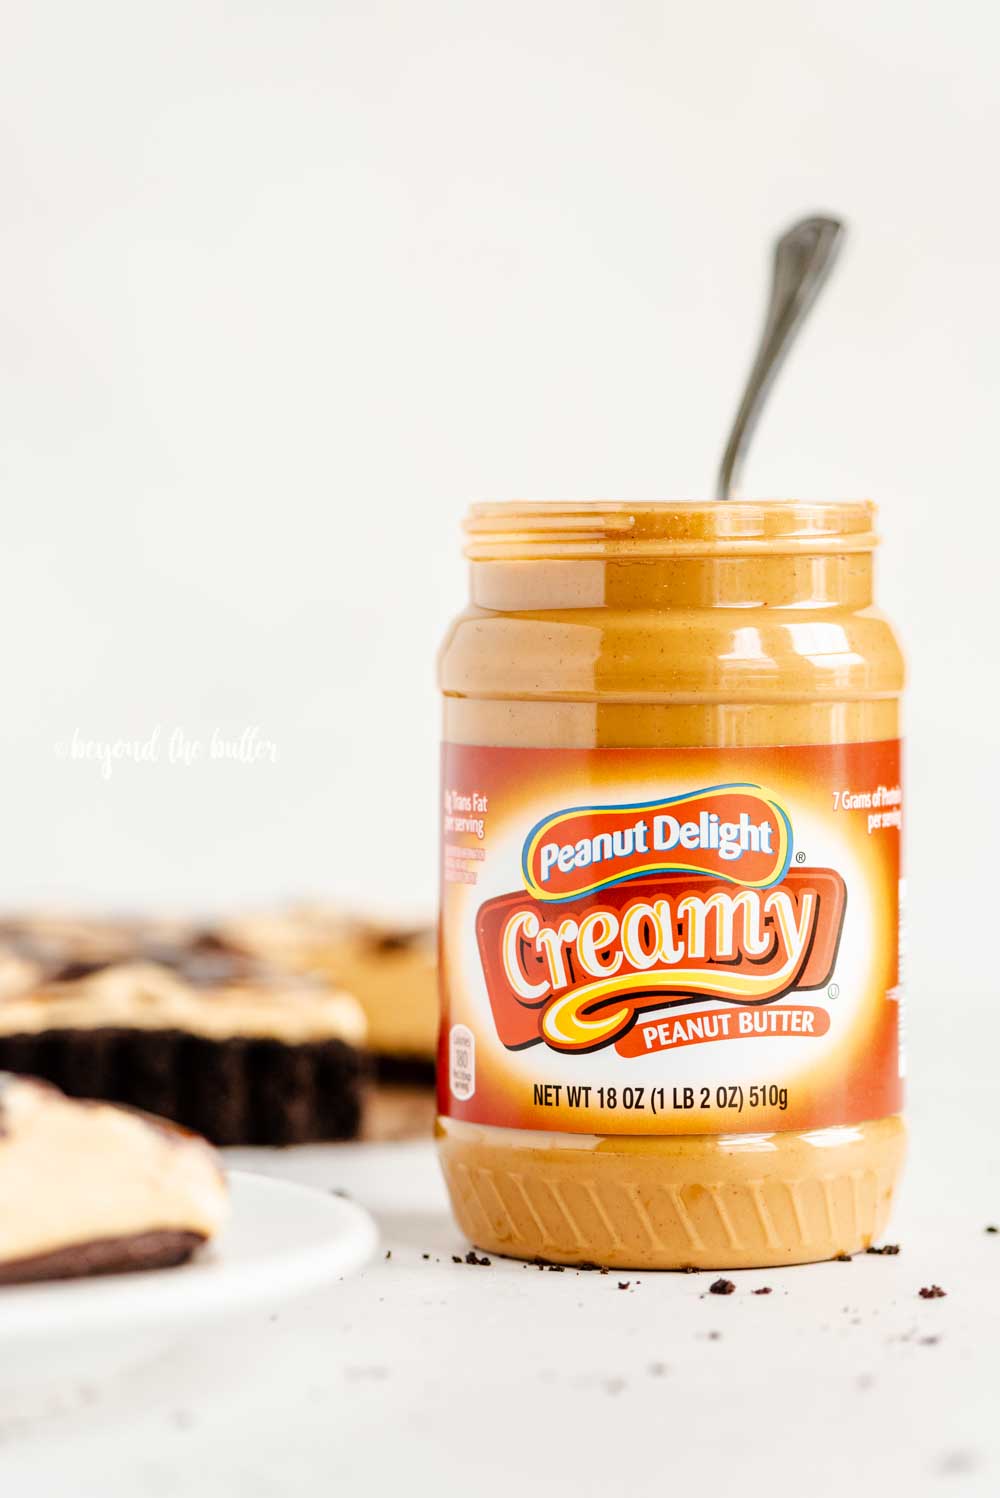 Front view of ALDI's opened jar of Peanut Delight Creamy Peanut Butter next to a chocolate peanut butter swirl tart | All Images © Beyond the Butter™